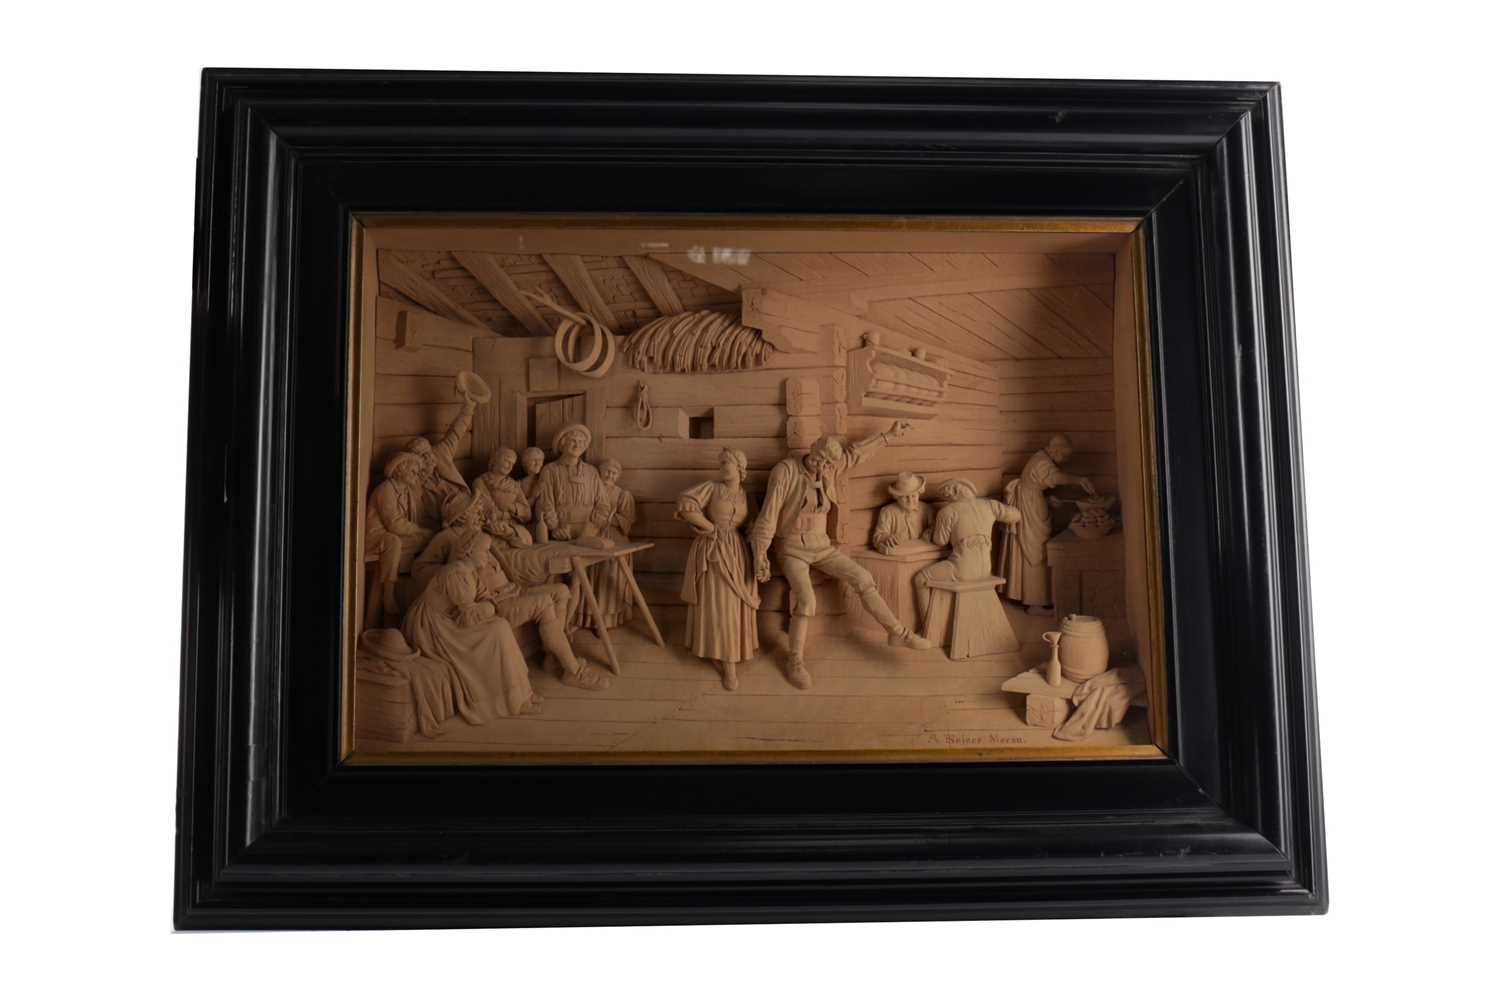 Lot 1369 - A TYROLEAN CARVED WOOD RELIEF BY SEBASTIAN STEINER